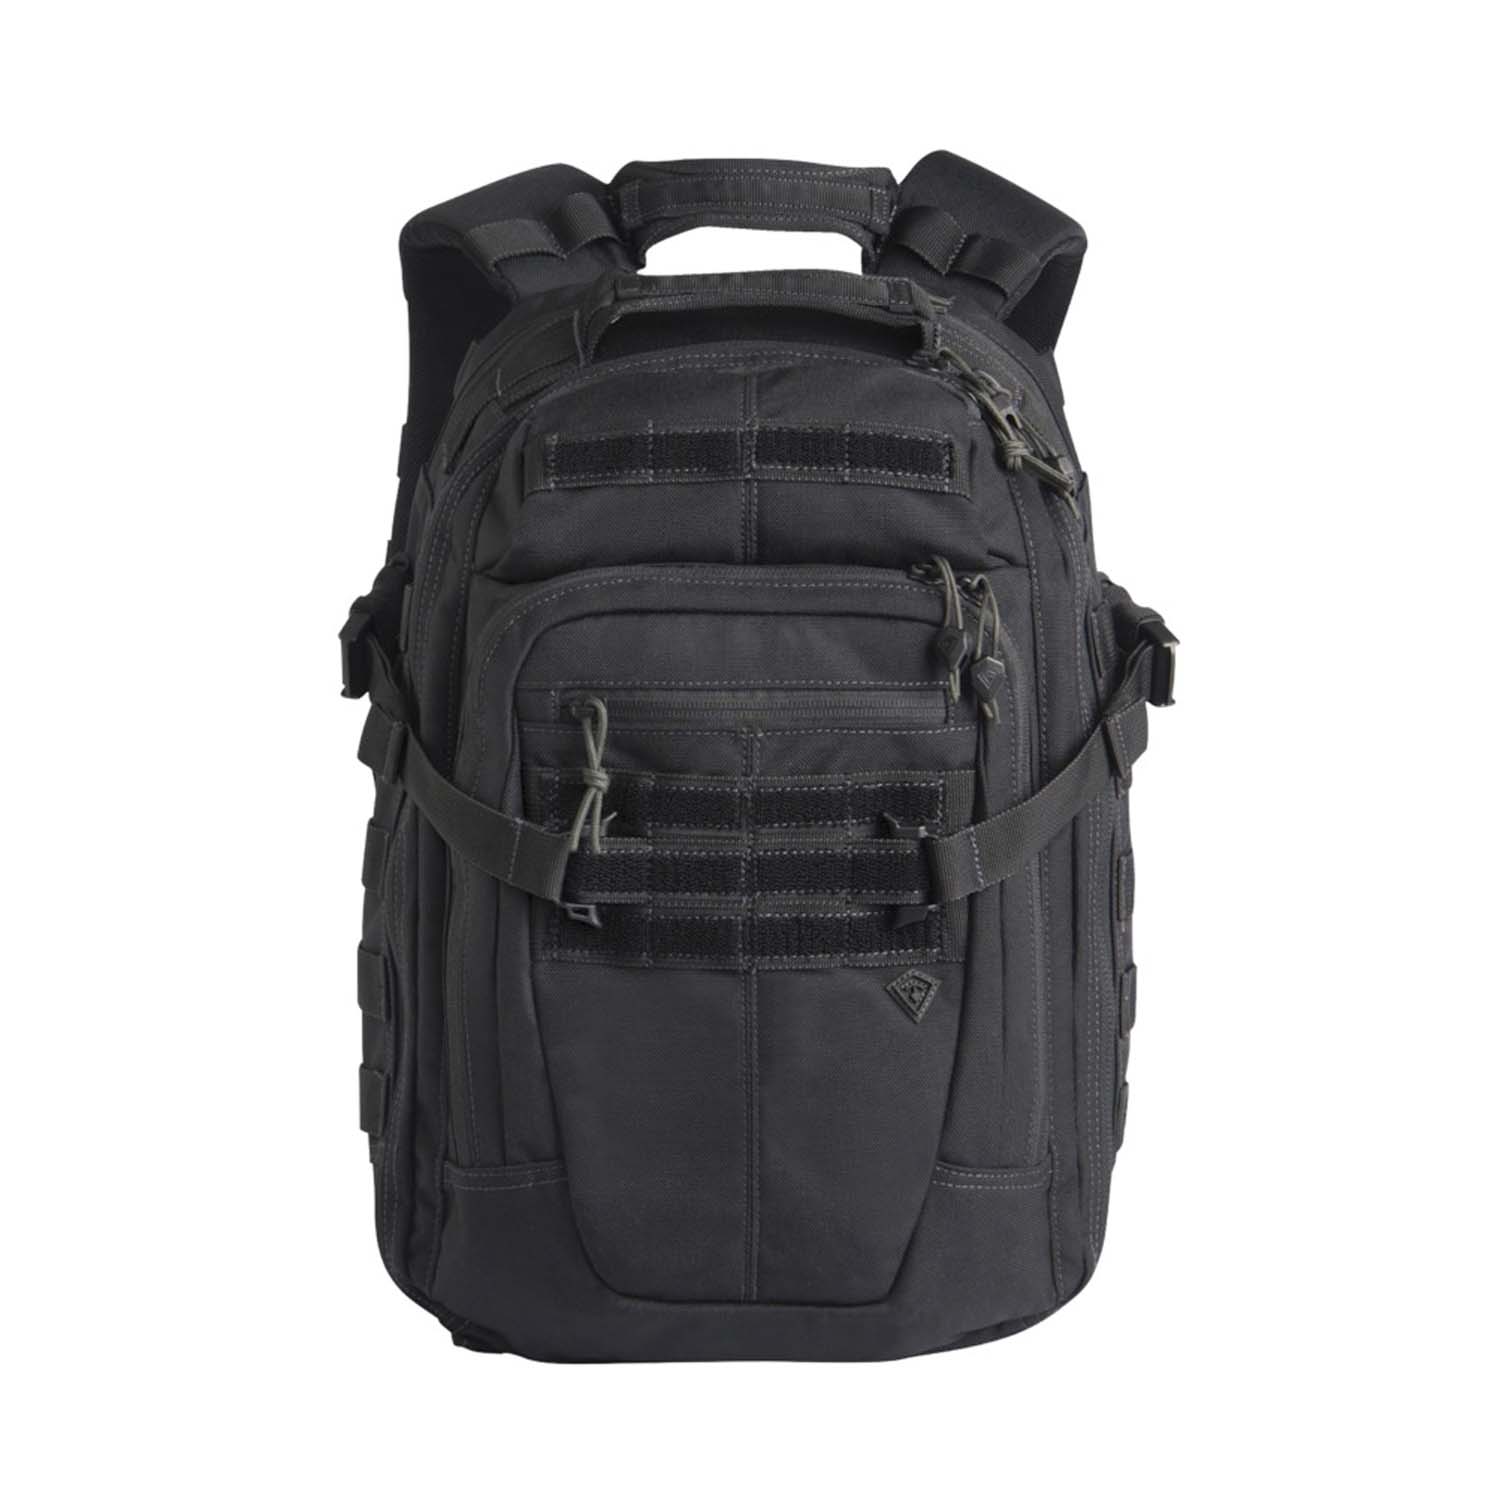 FIRST TACTICAL SPECIALIST HALF-DAY BACKPACK